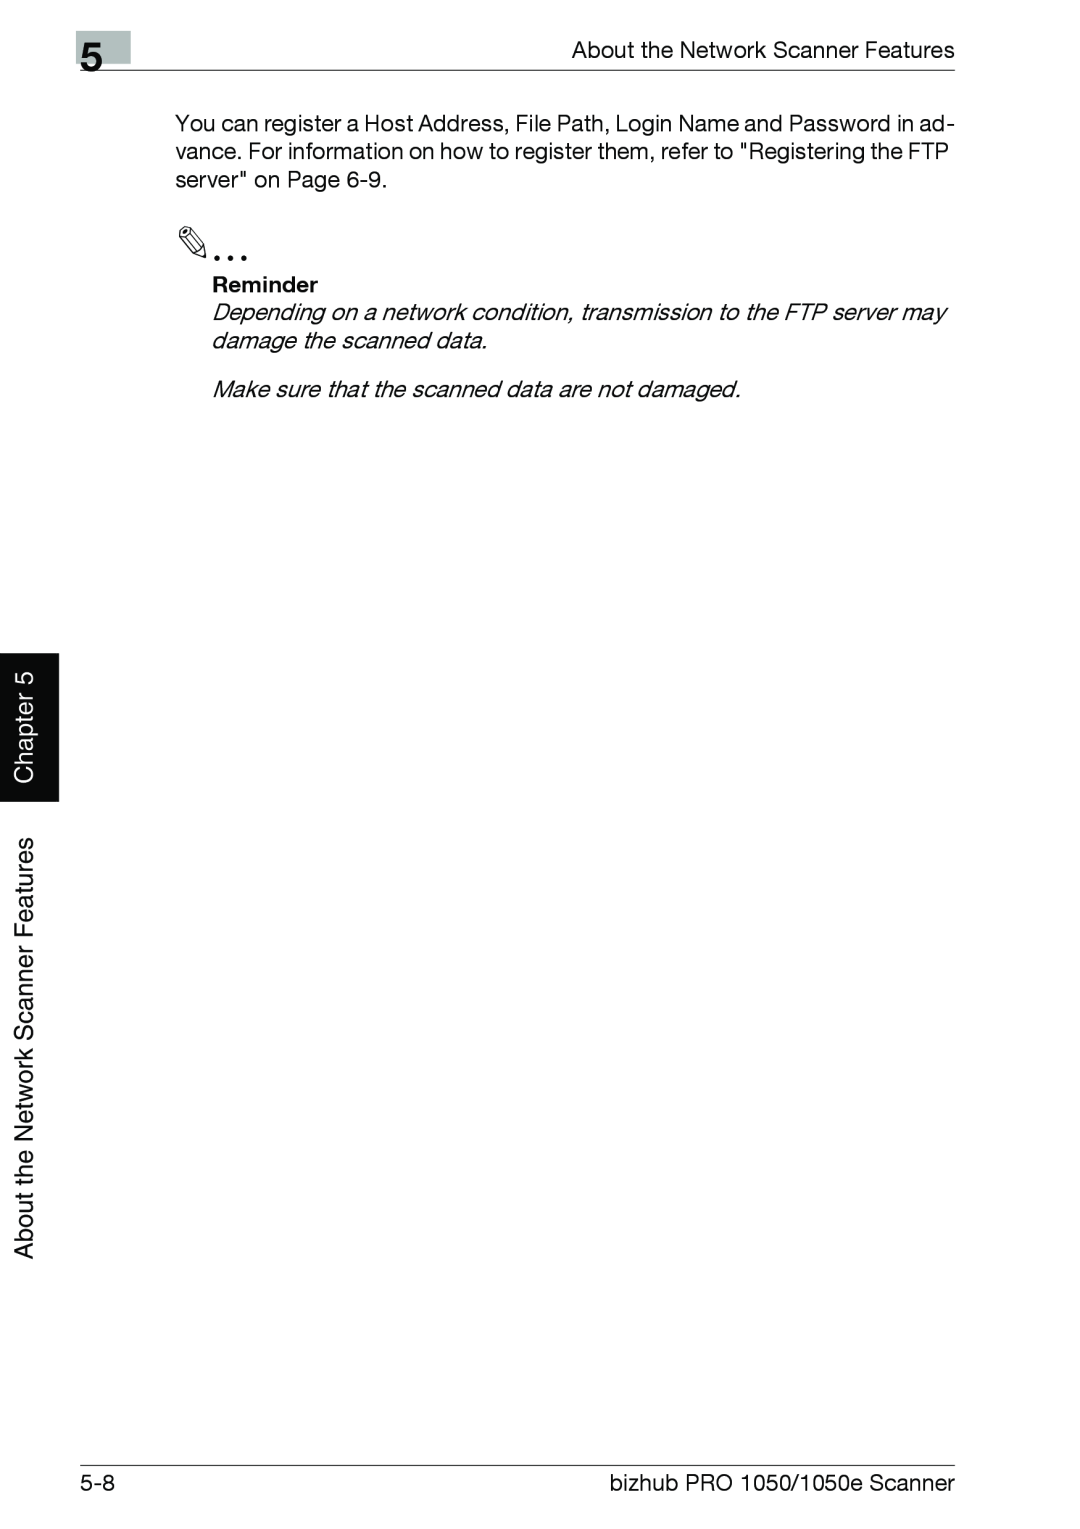 Konica Minolta 1050E appendix Chapter, About the Network Scanner Features, Reminder 